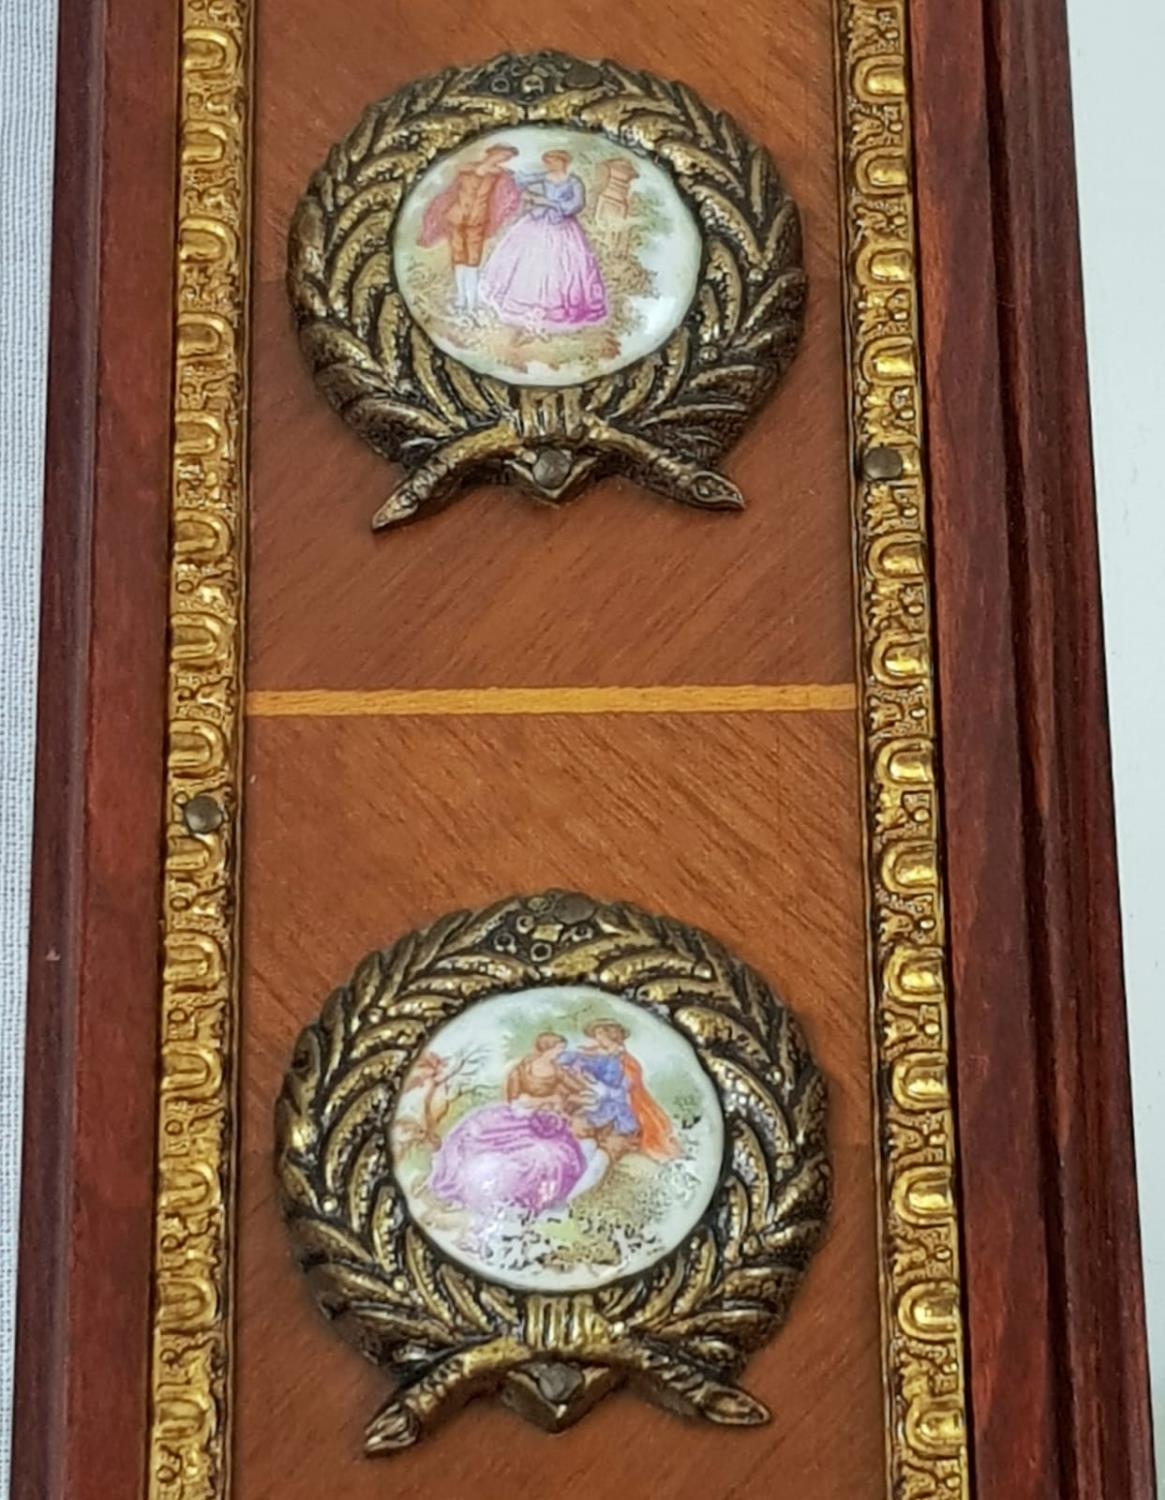 Stunning Large Antique French/Italian Ornate Cameo Porcelain Wall Mirror. Intricate decorative - Image 5 of 6